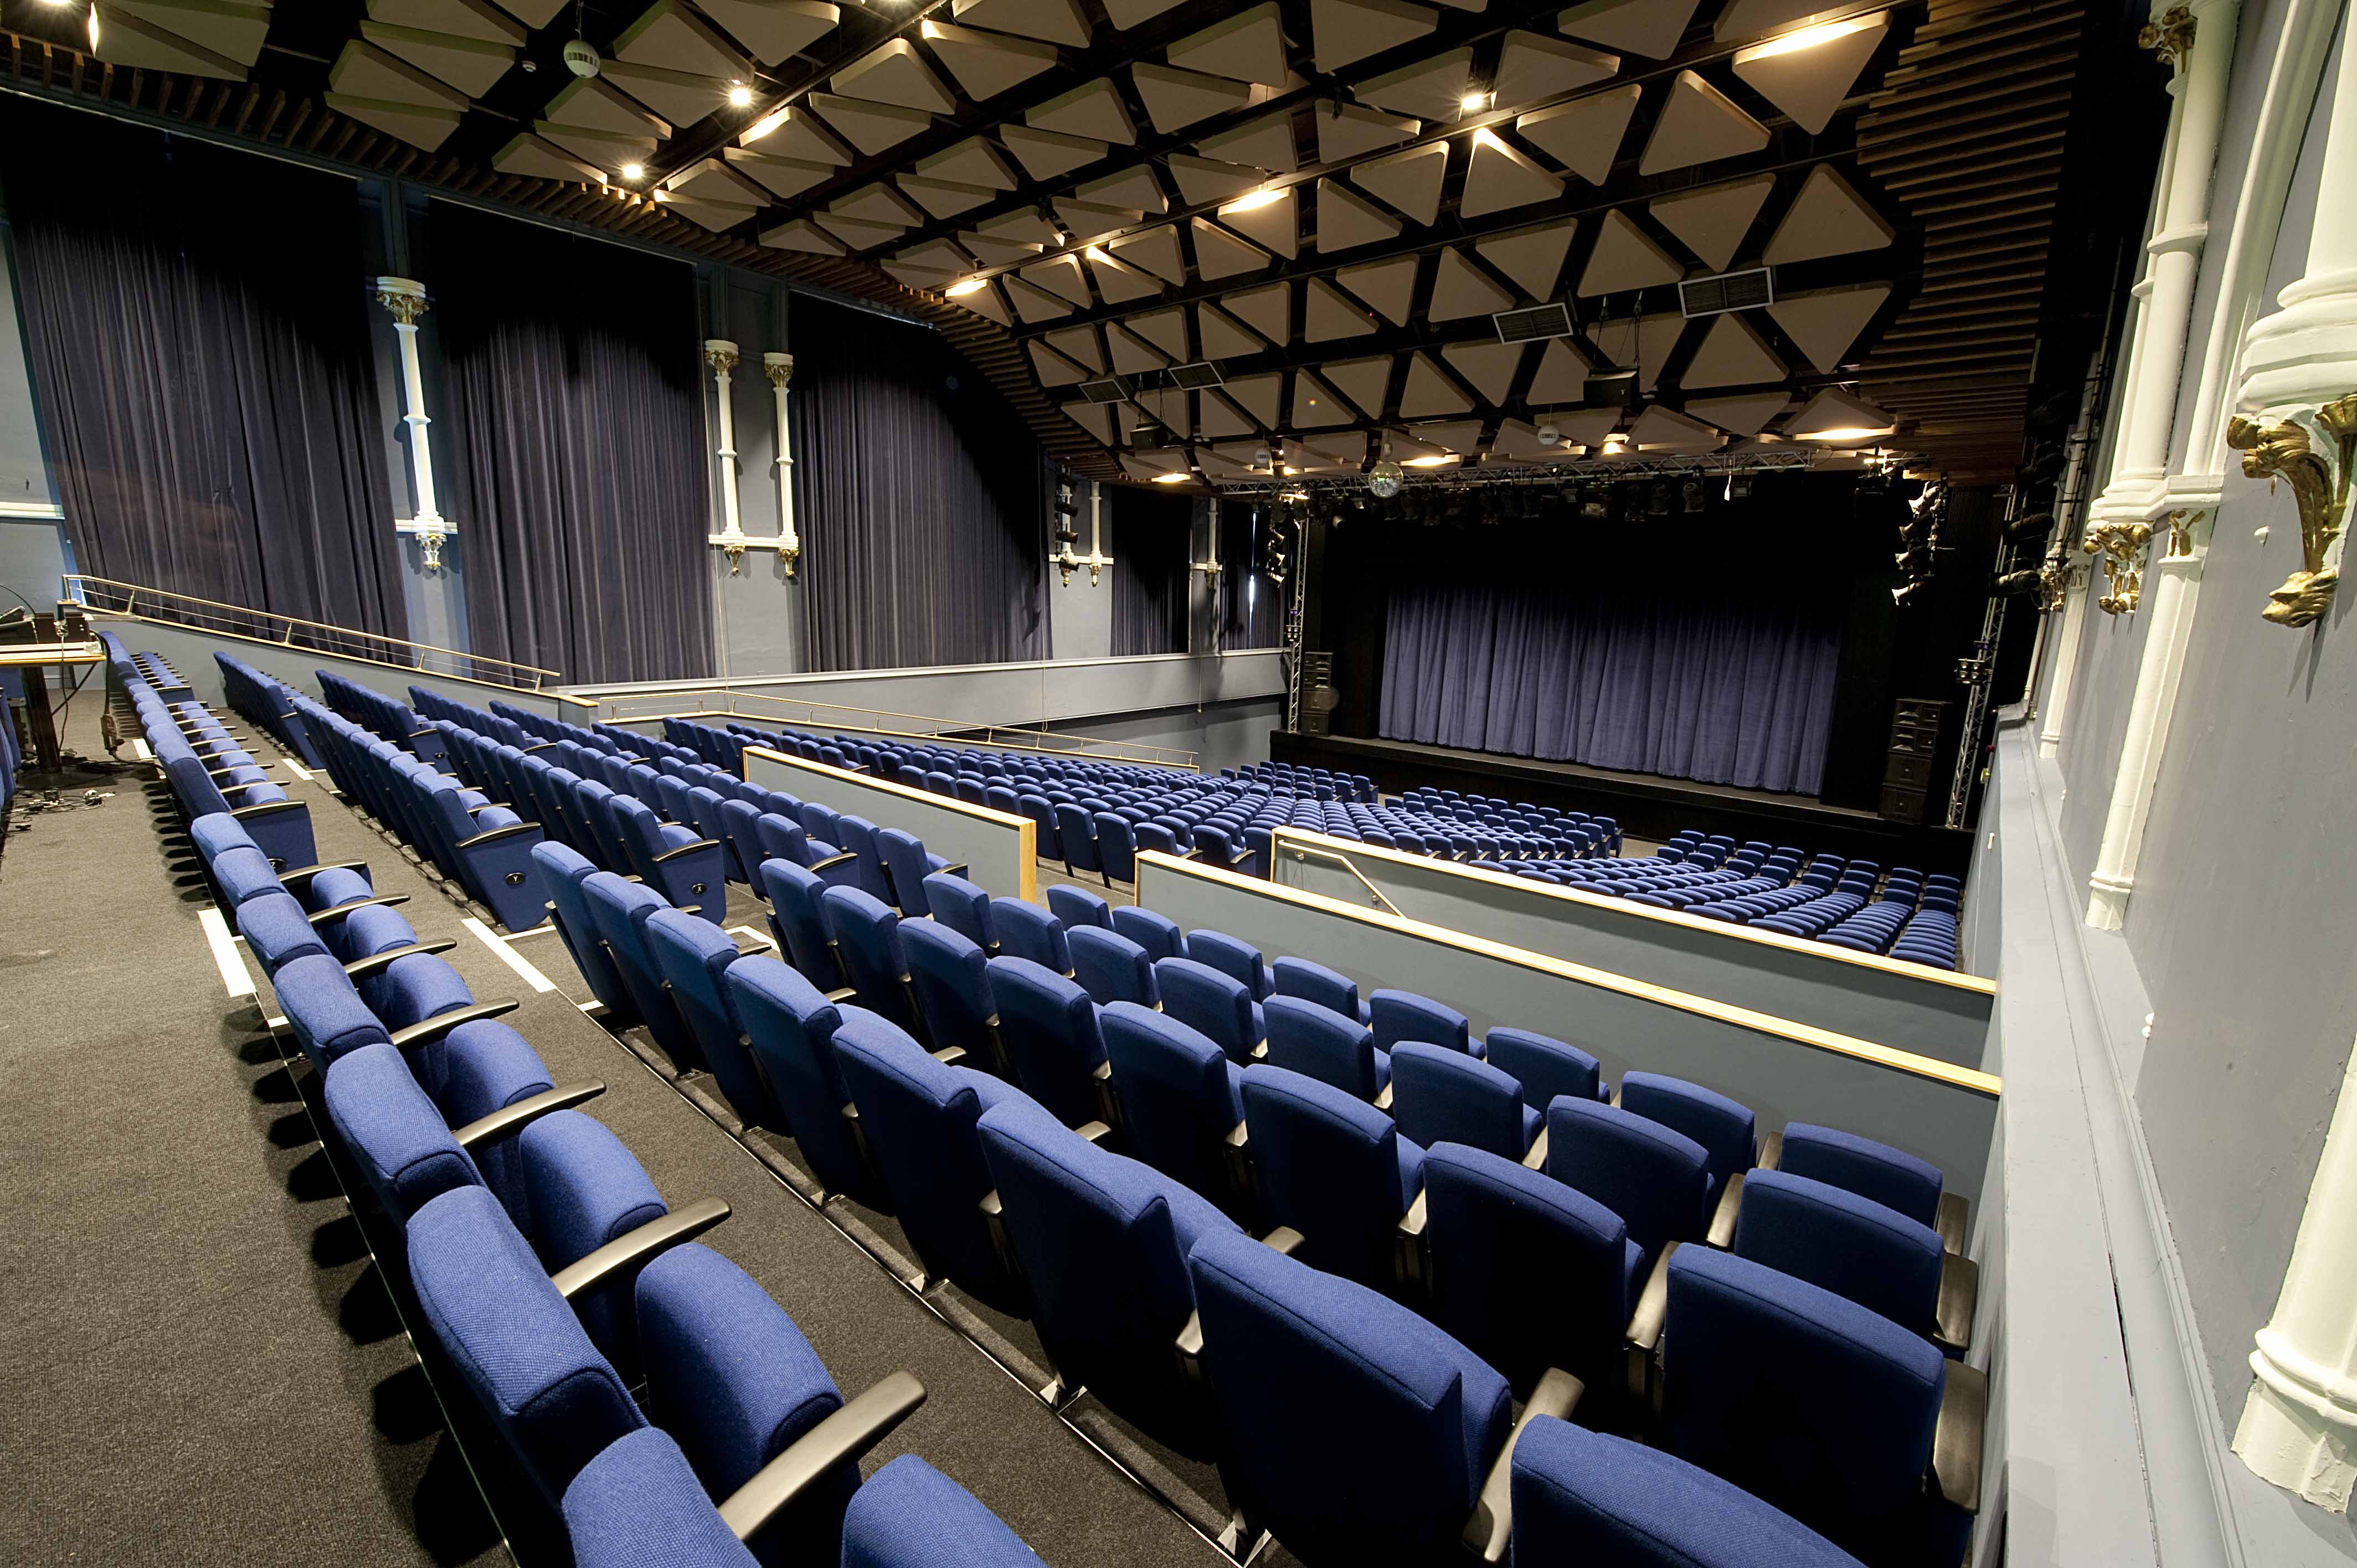 Explore Our Spectacular Range of Theater Seating